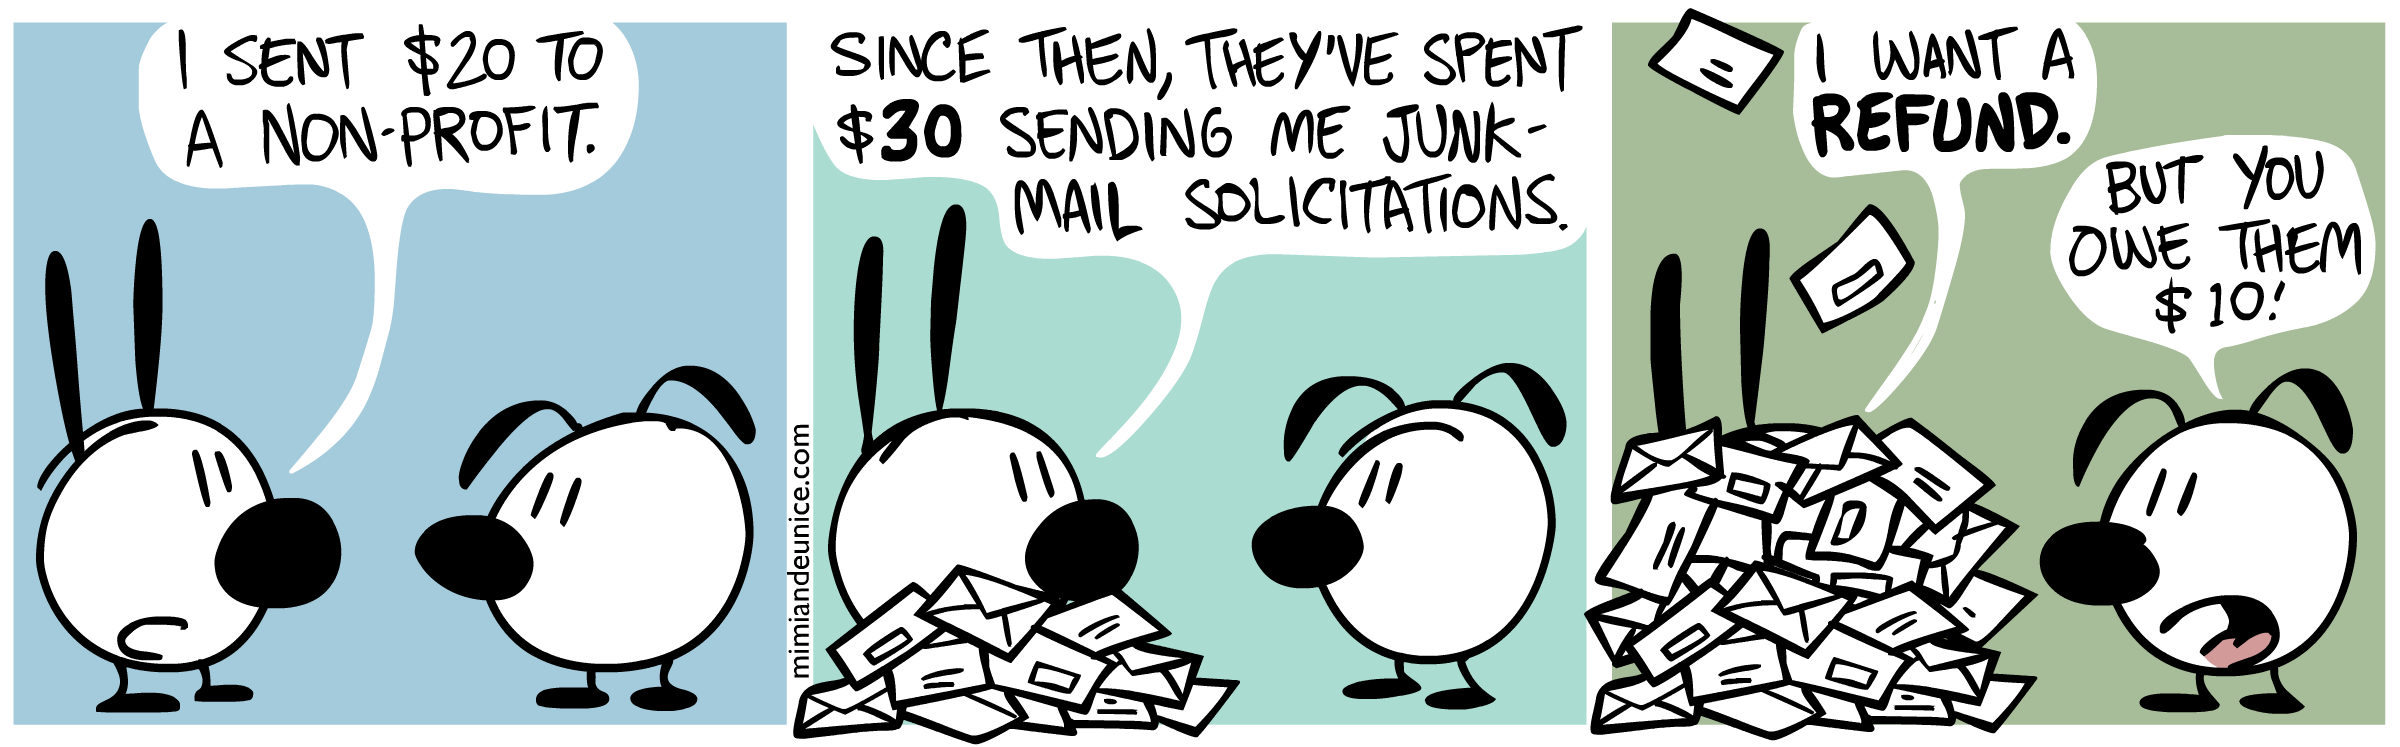 (comic) Mimi: 'I sent $20 to a non-profit. Since then, they've
    spent $30 sending me junk-mail solicitations. I want a refund.' Eunice:
    'But you owe them $10!'